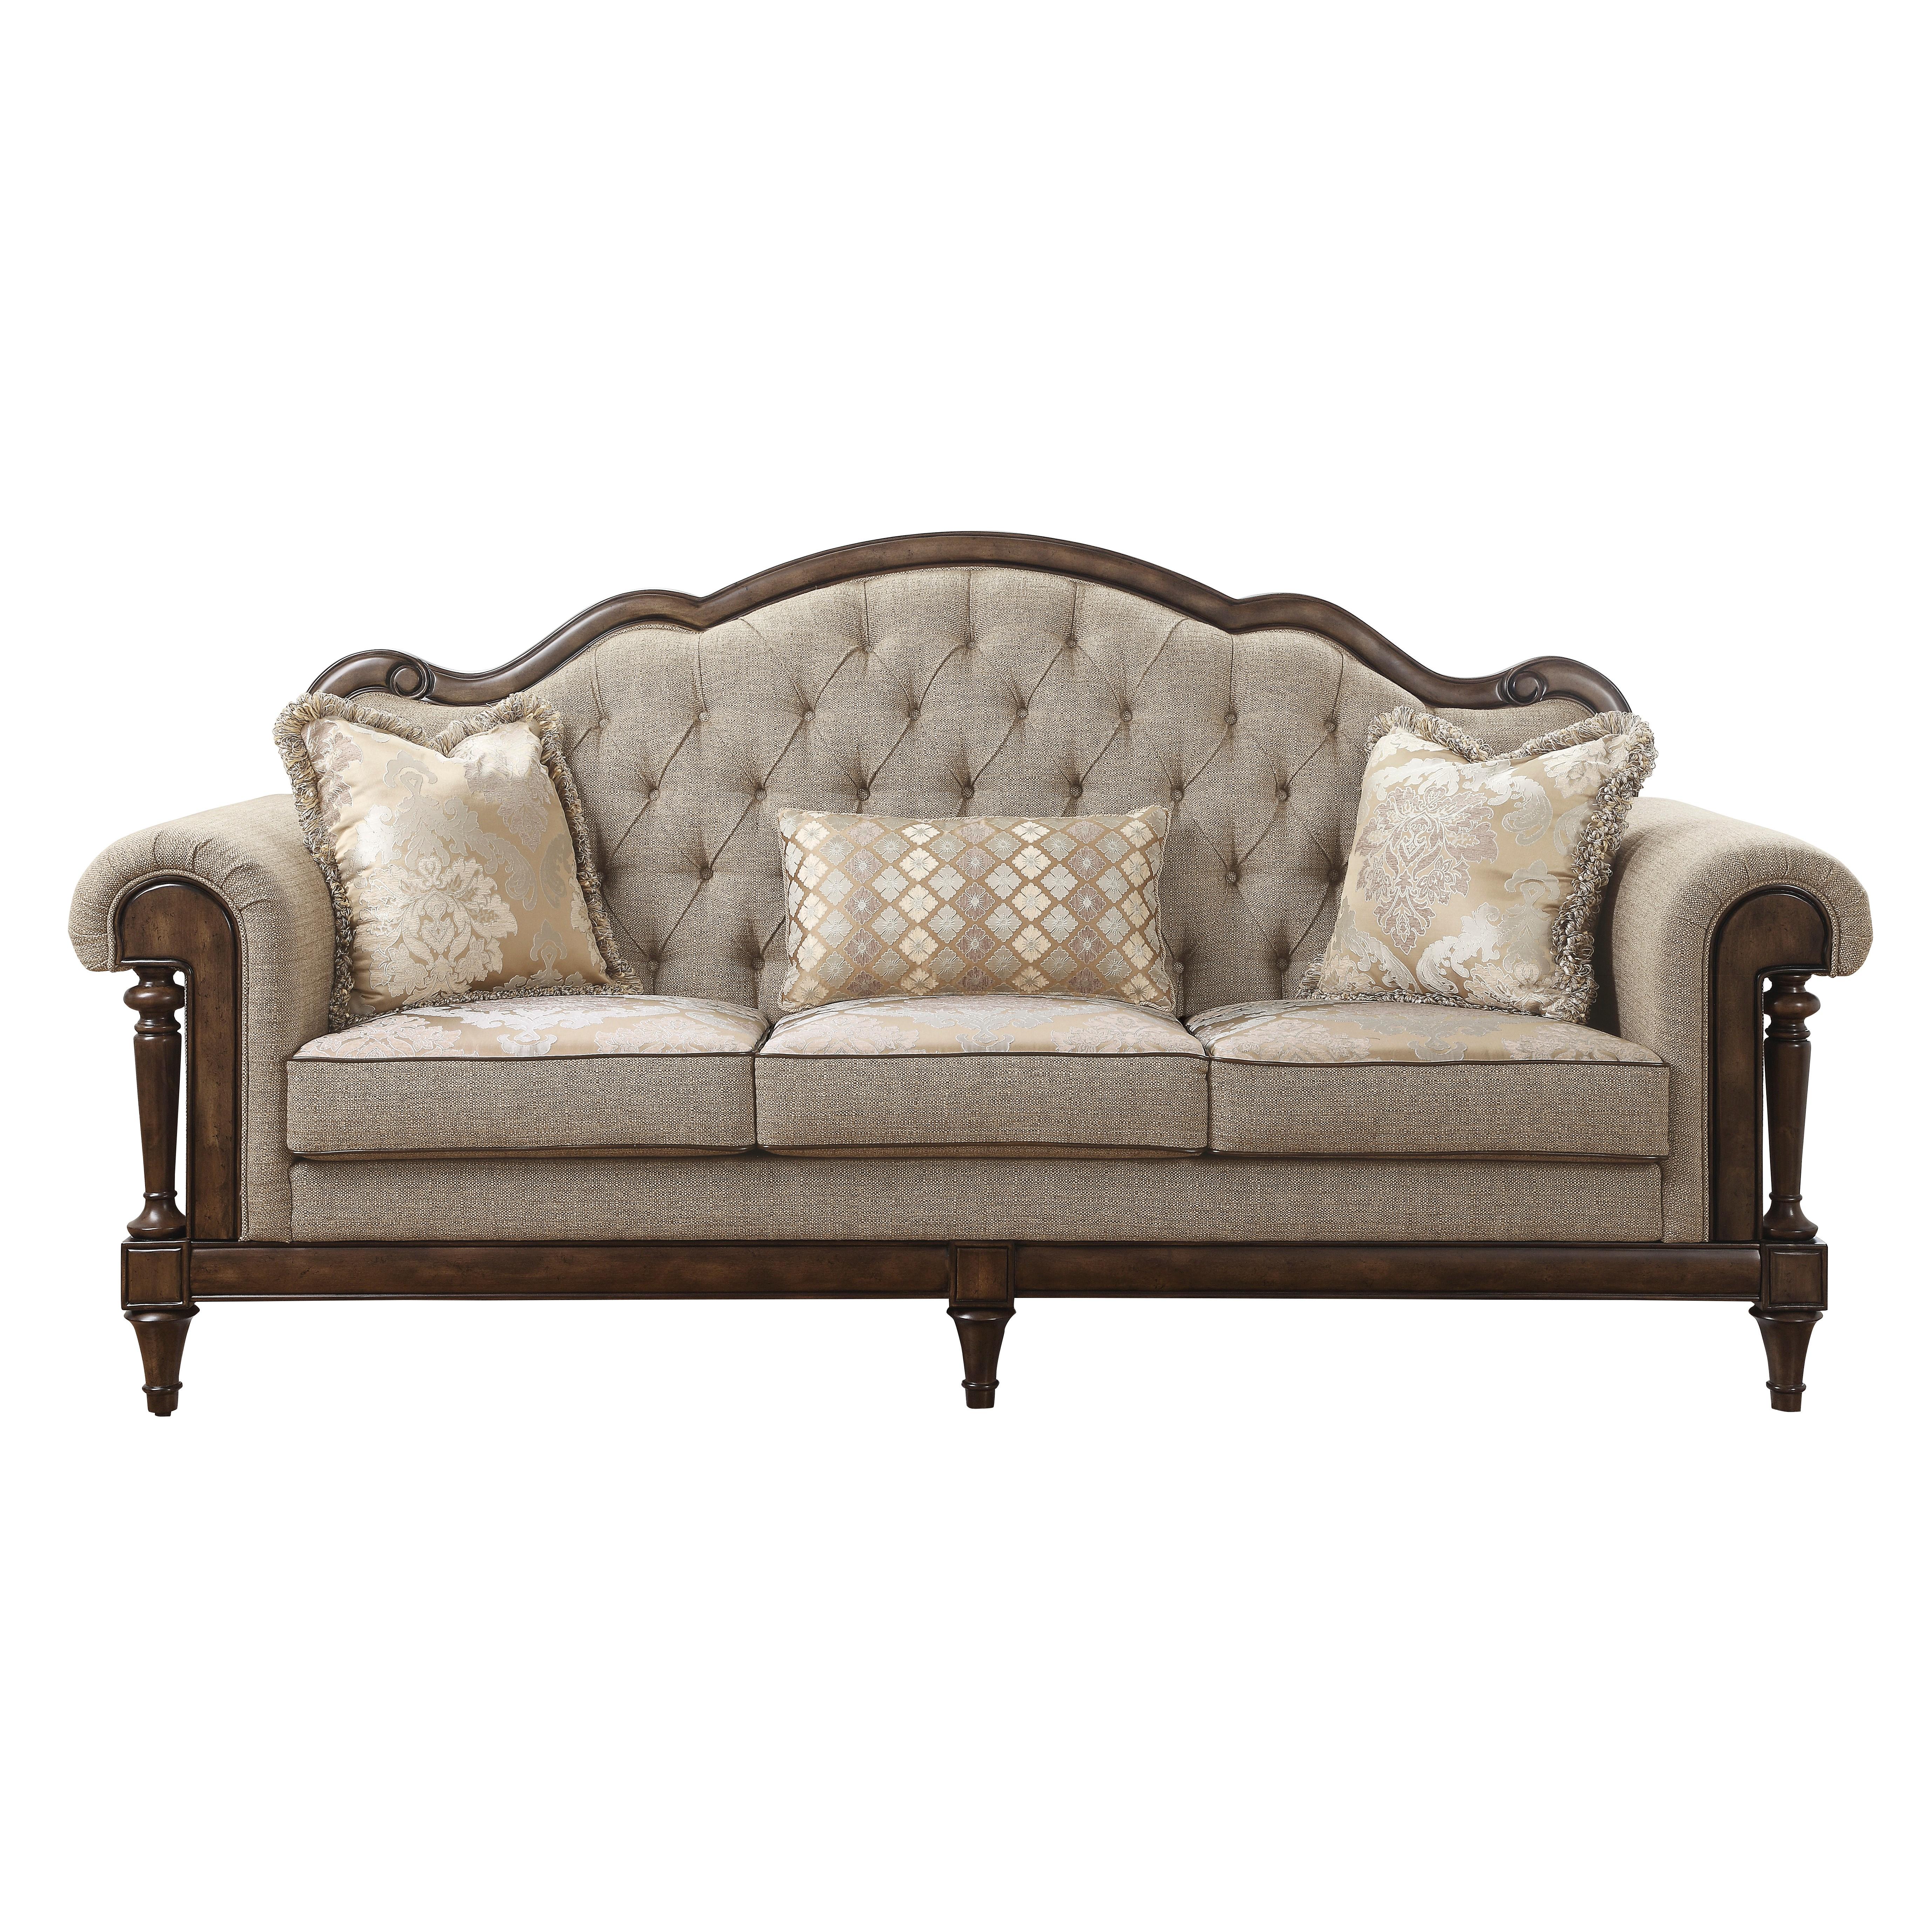 Traditional Sofa 16829-3 Heath Court 16829-3 in Light Brown 